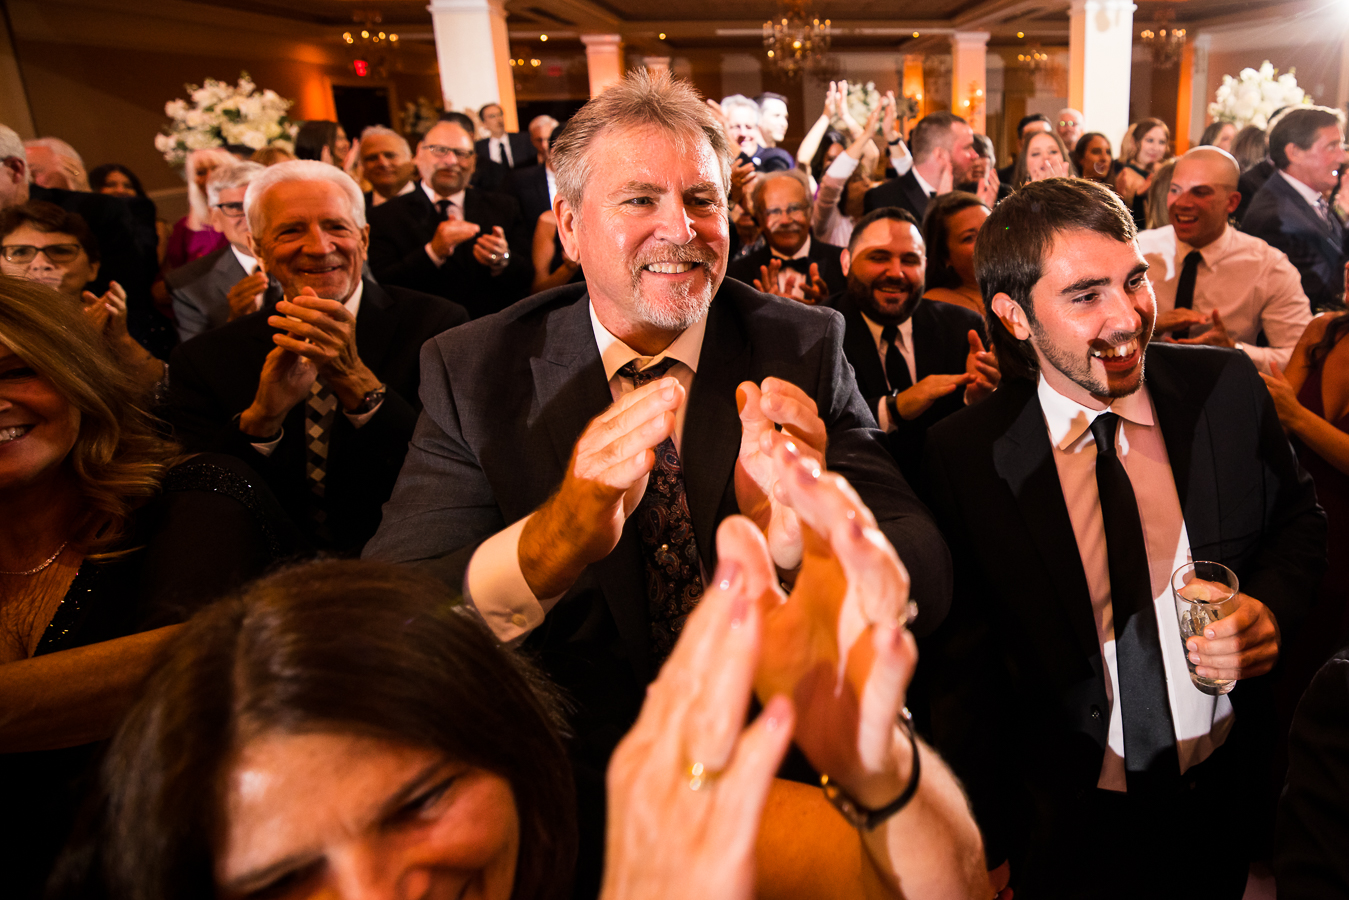 fun image of wedding guests as they clap and cheer while the wedding party, parents and bride and groom enter